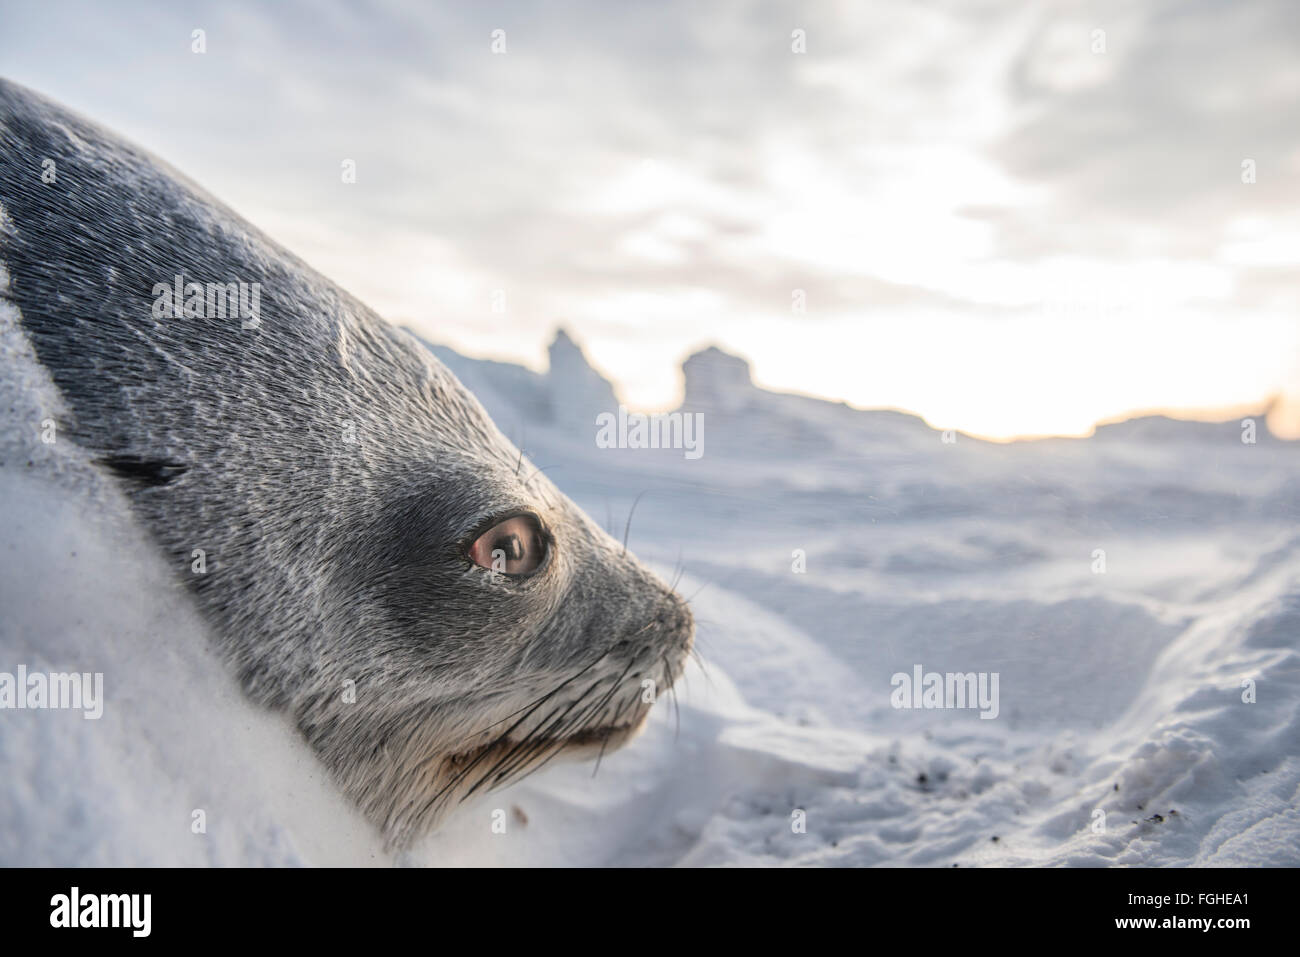 A dead weddell seal frozen in place with its eyes still open. Stock Photo